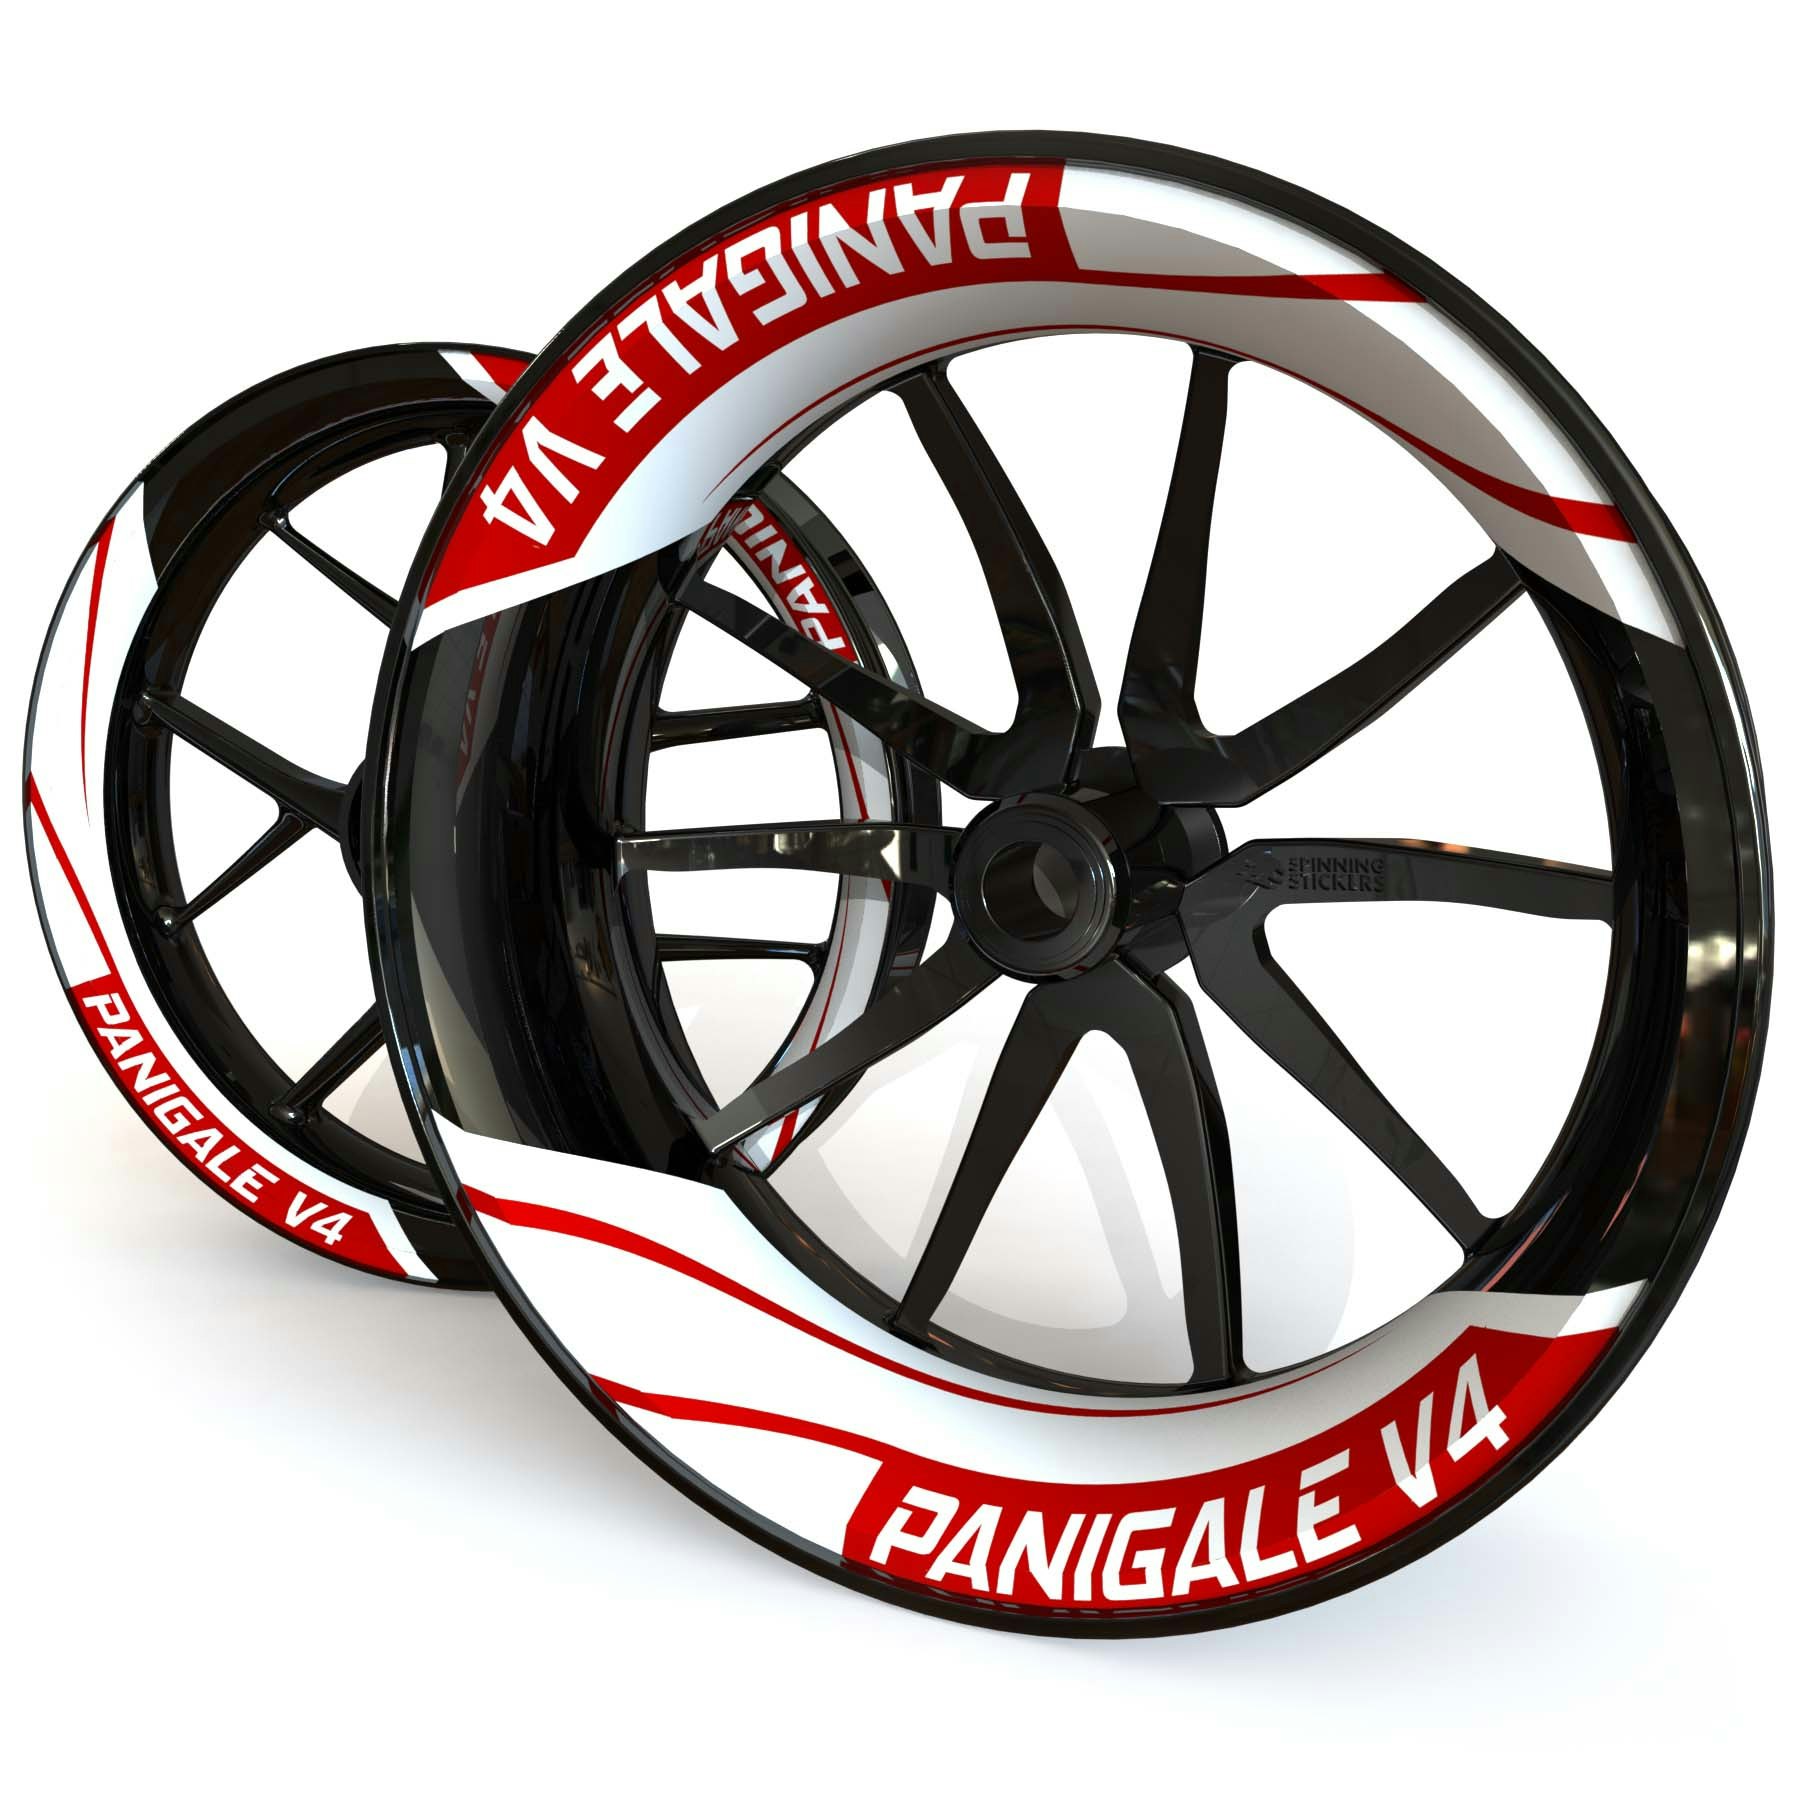 Ducati PANIGALE V4 Wheel Stickers kit - Two Piece Design